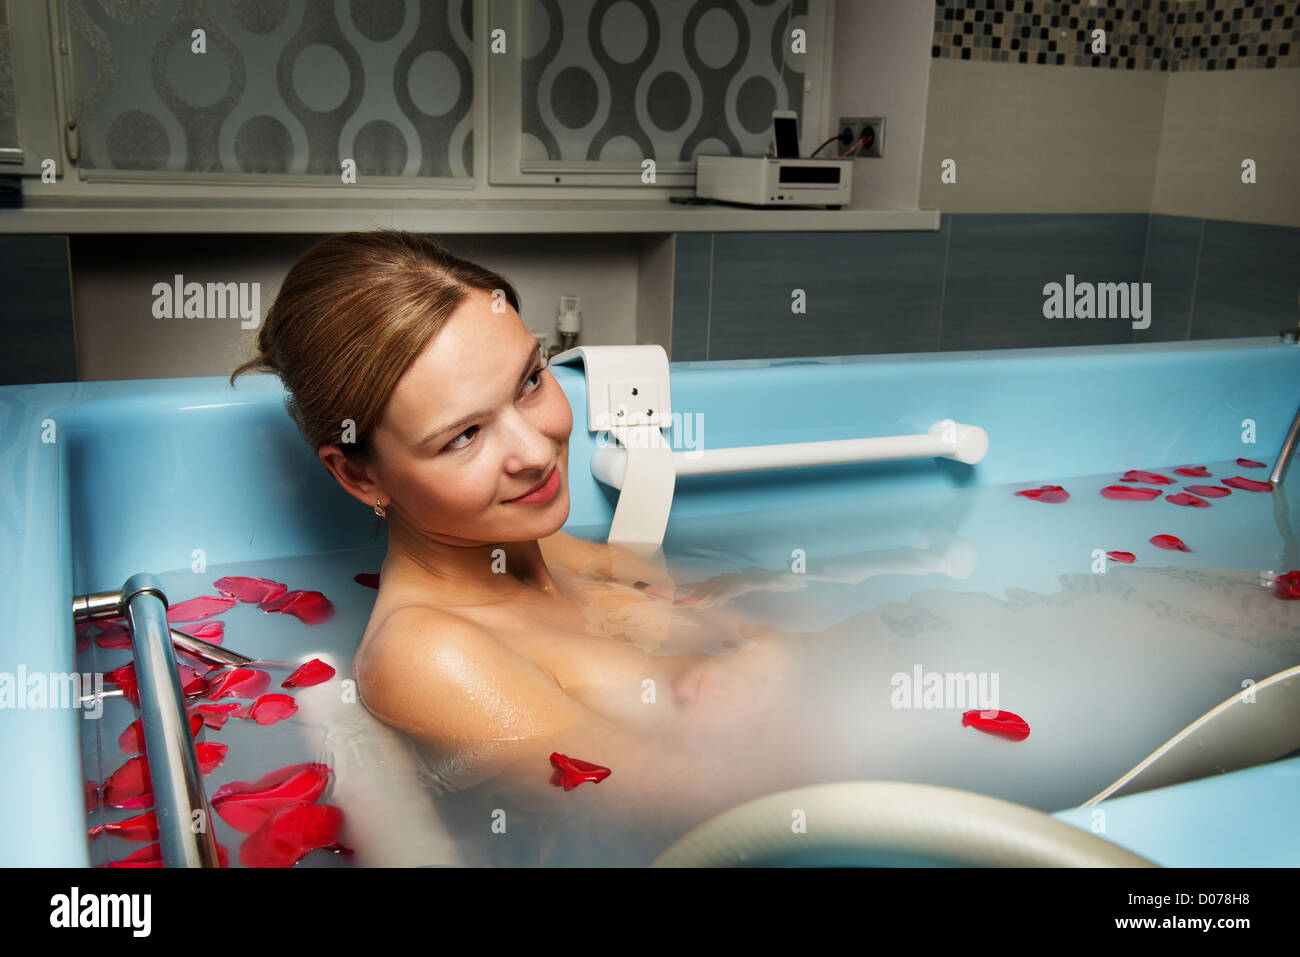 nude woman bath petals flower relaxation spa salon one young Stock Photo